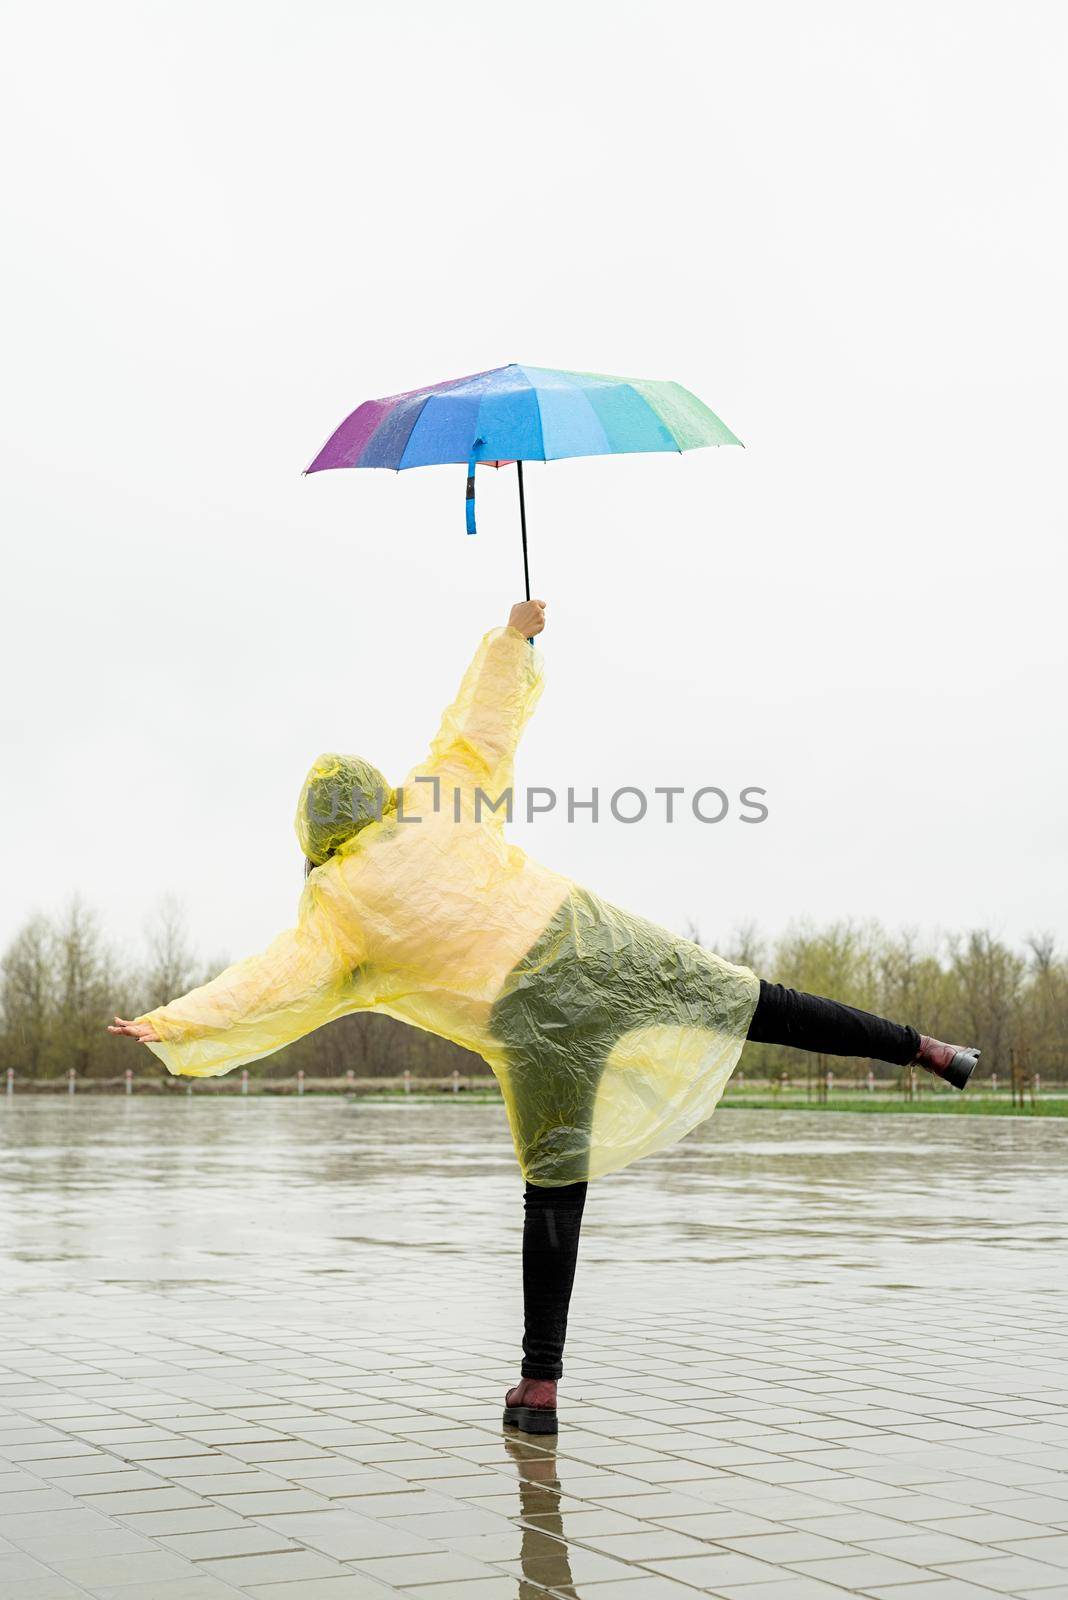 Beautiful brunnette woman in yellow raincoat holding rainbow umbrella dancing out in the rain